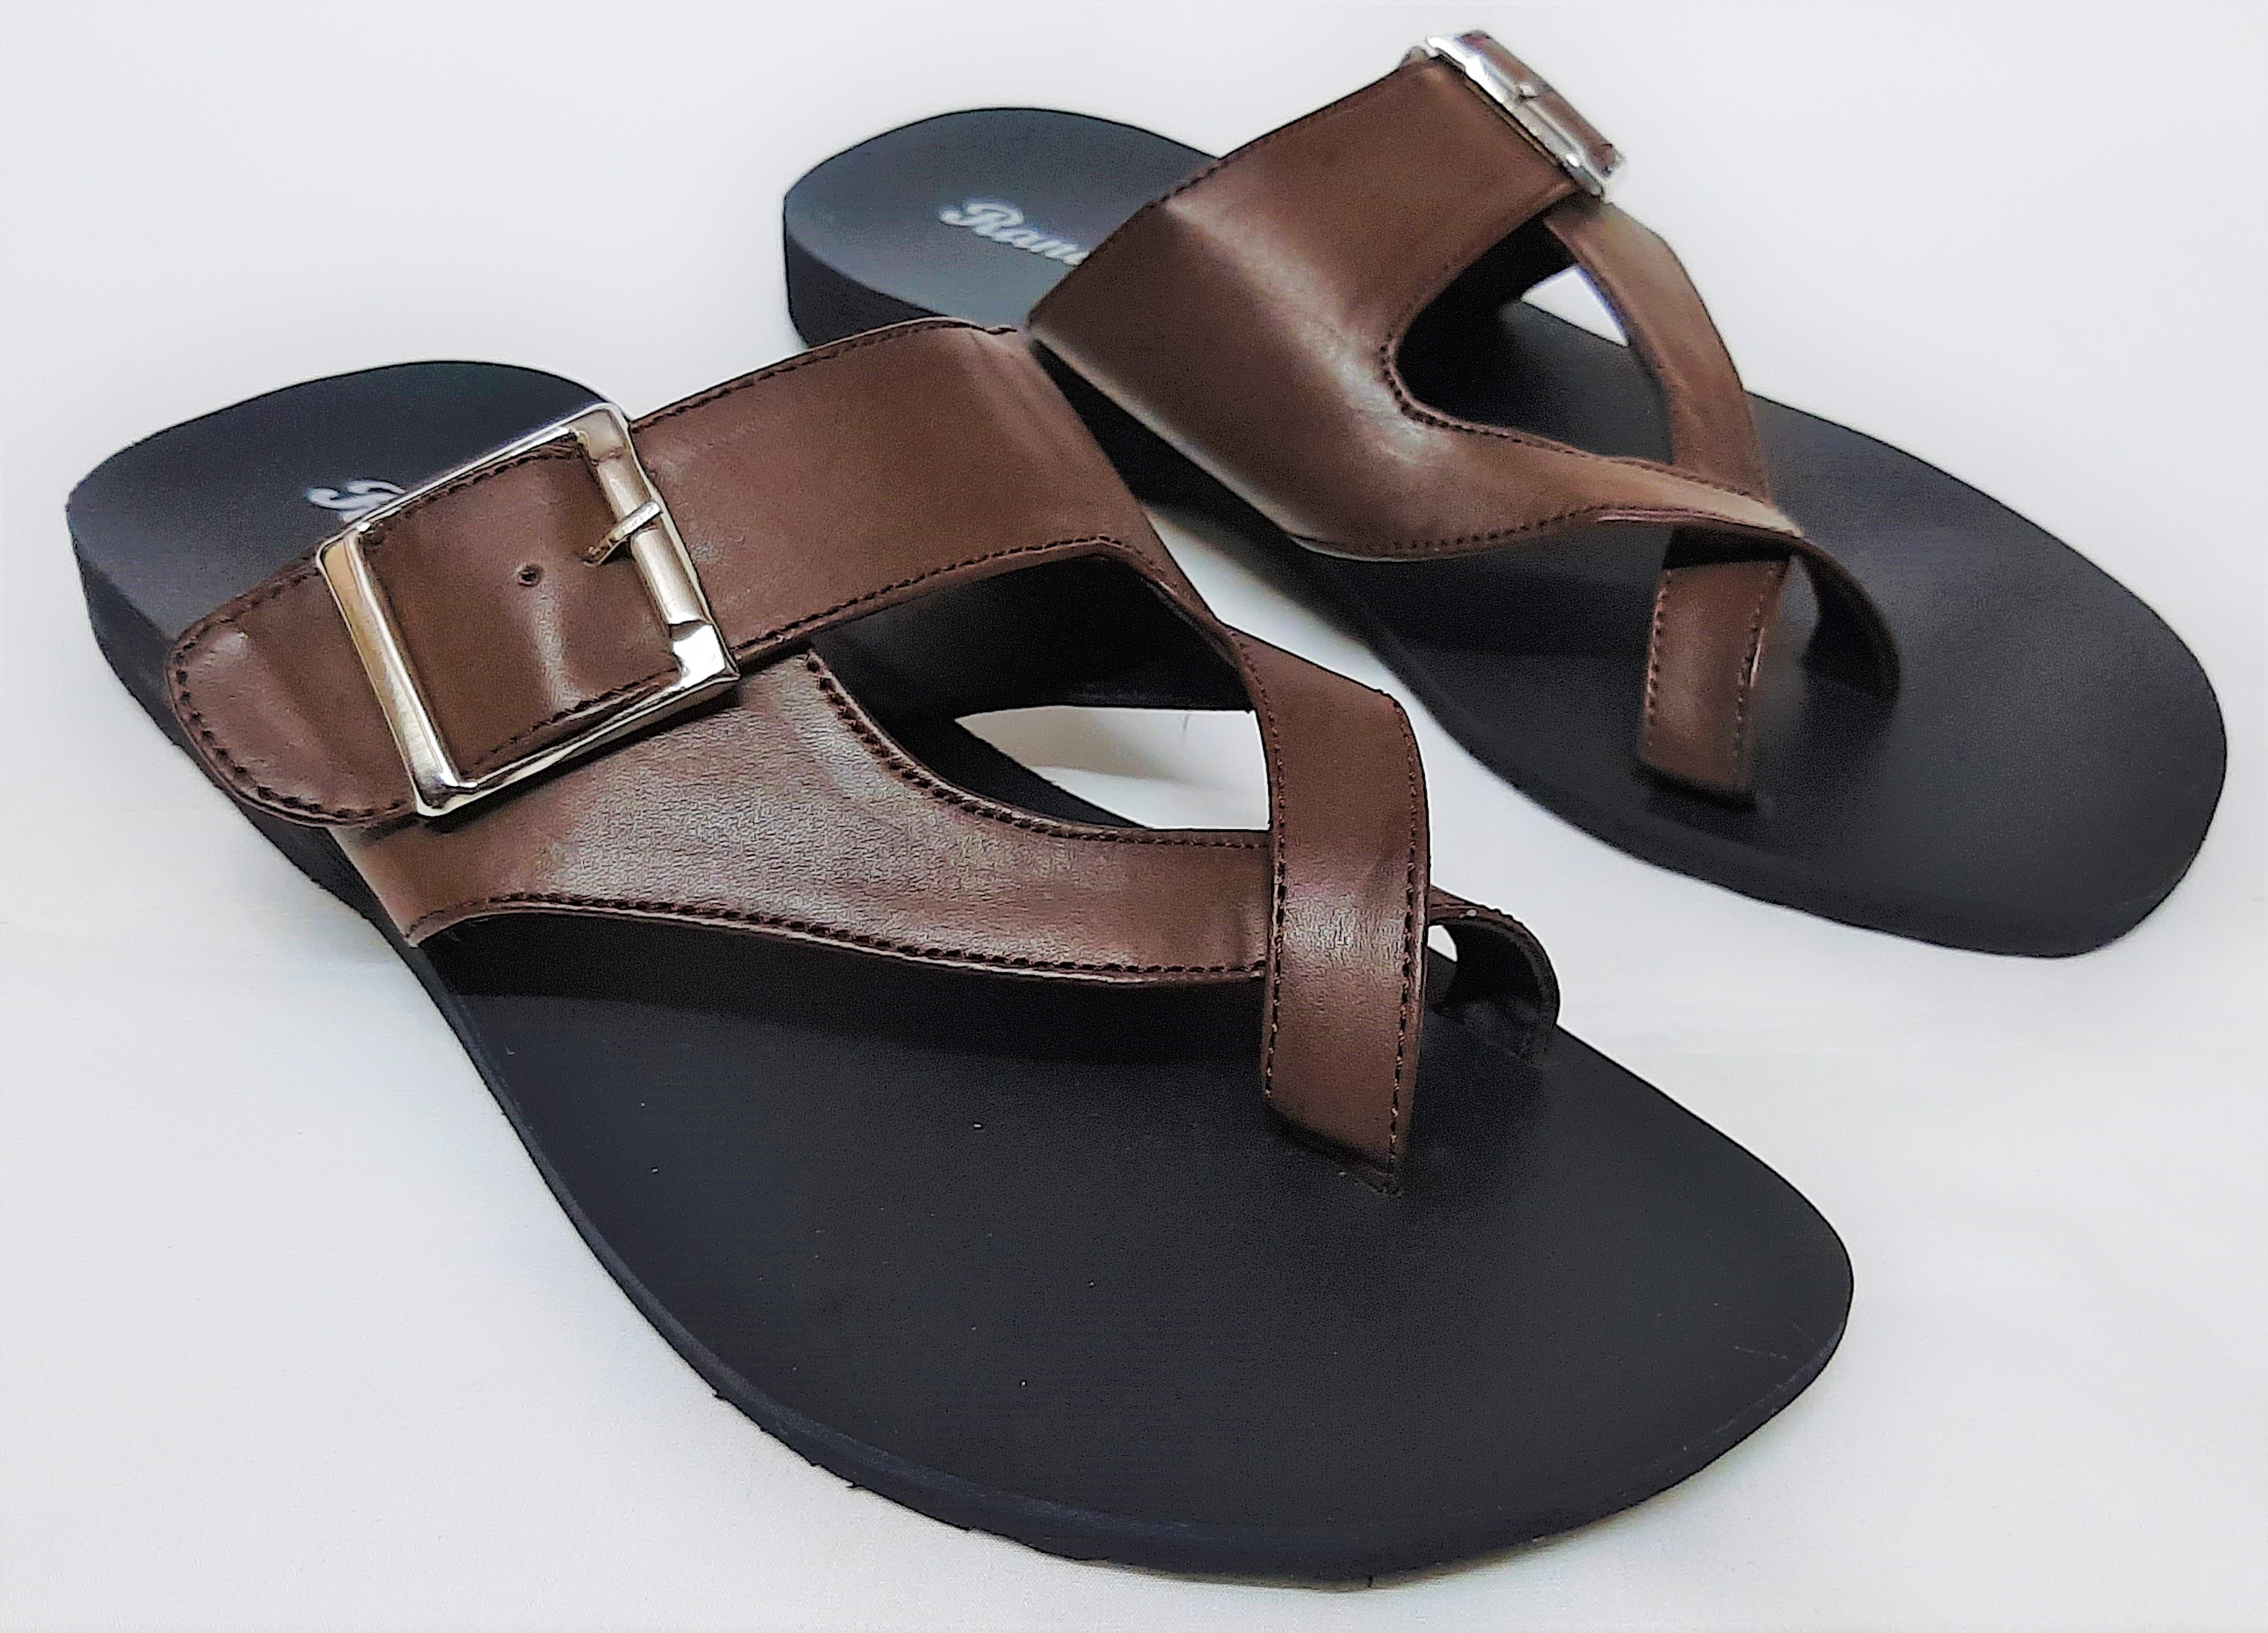 Buy Leather Chappal Brown Buckle G Online @ ₹699 from ShopClues